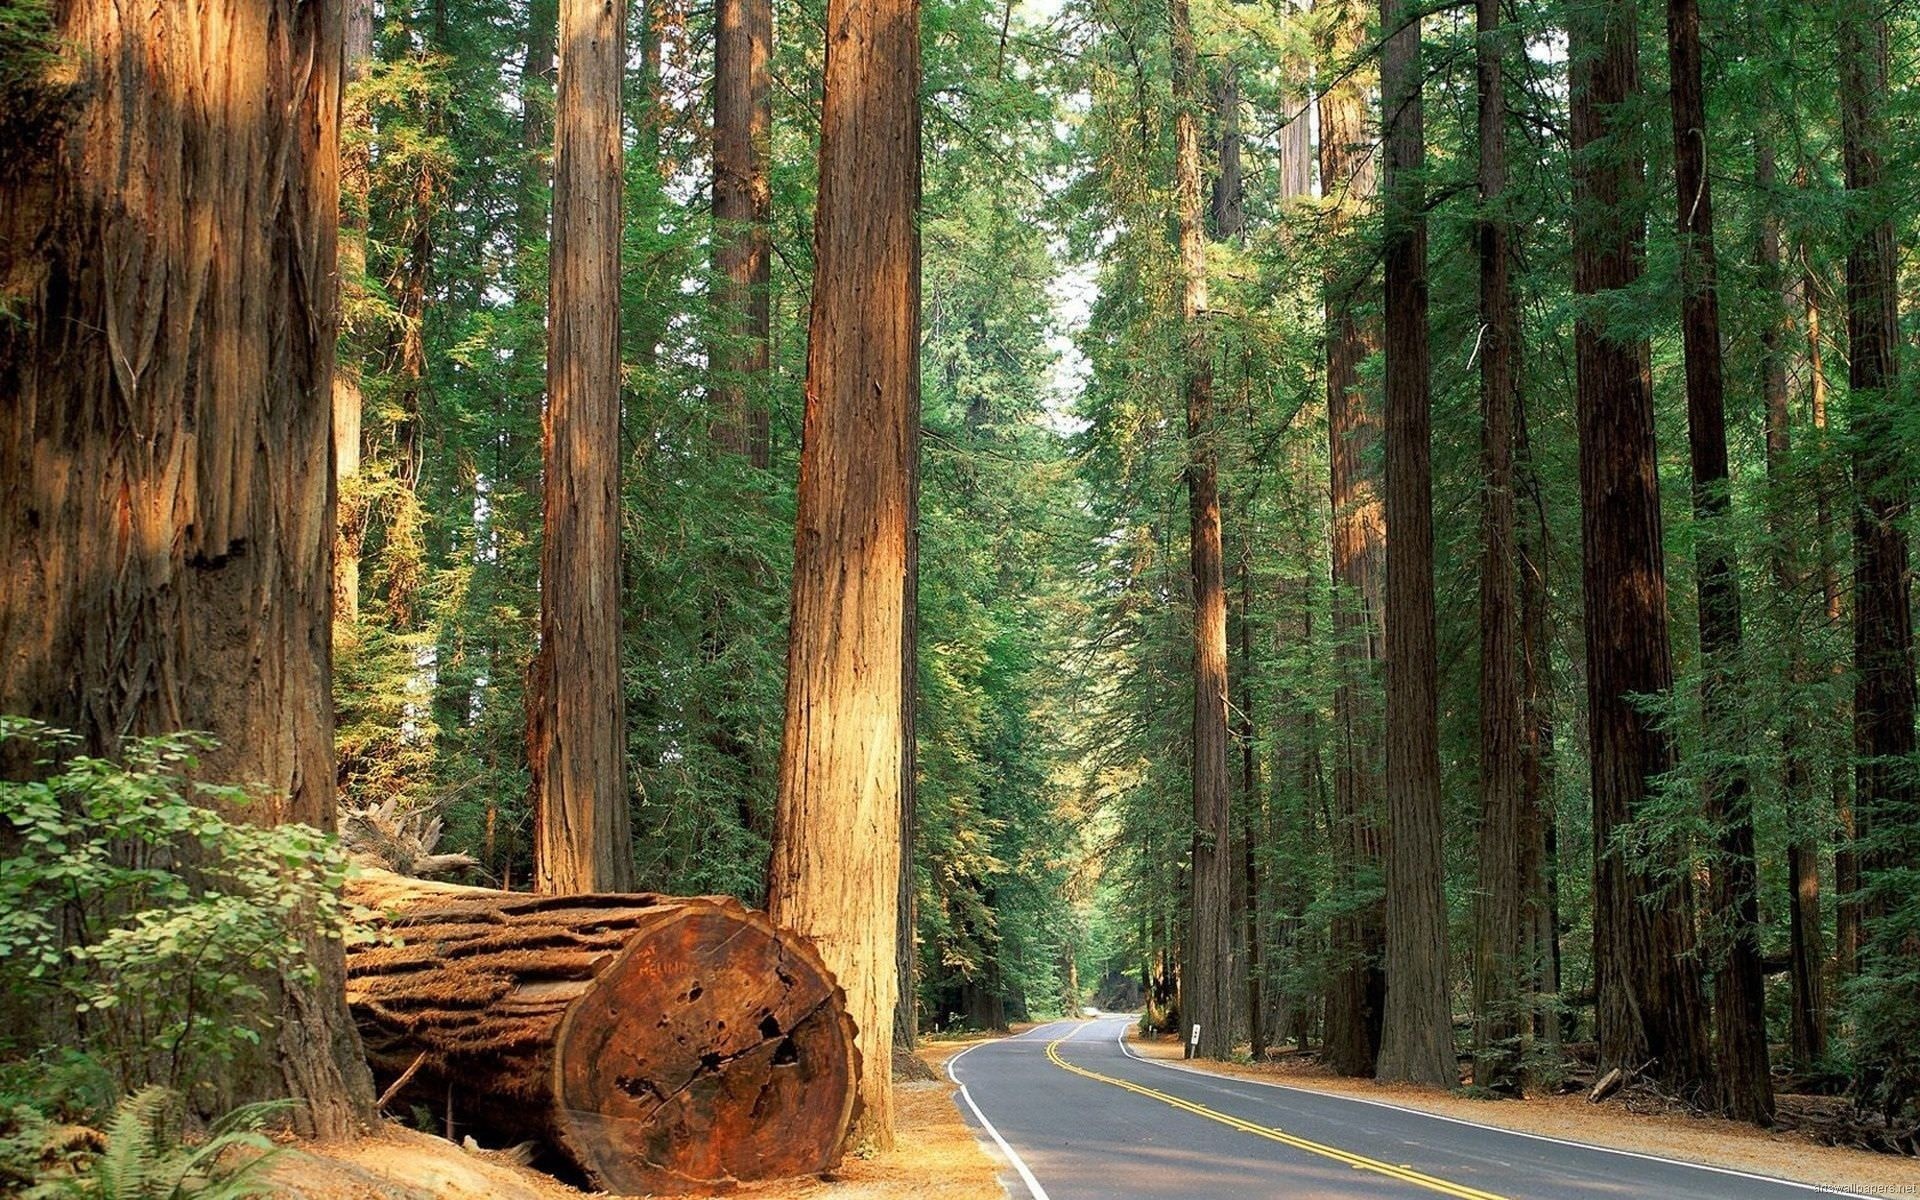 Sequoia national park, HD wallpapers, California road trips, Scenic state parks, 1920x1200 HD Desktop